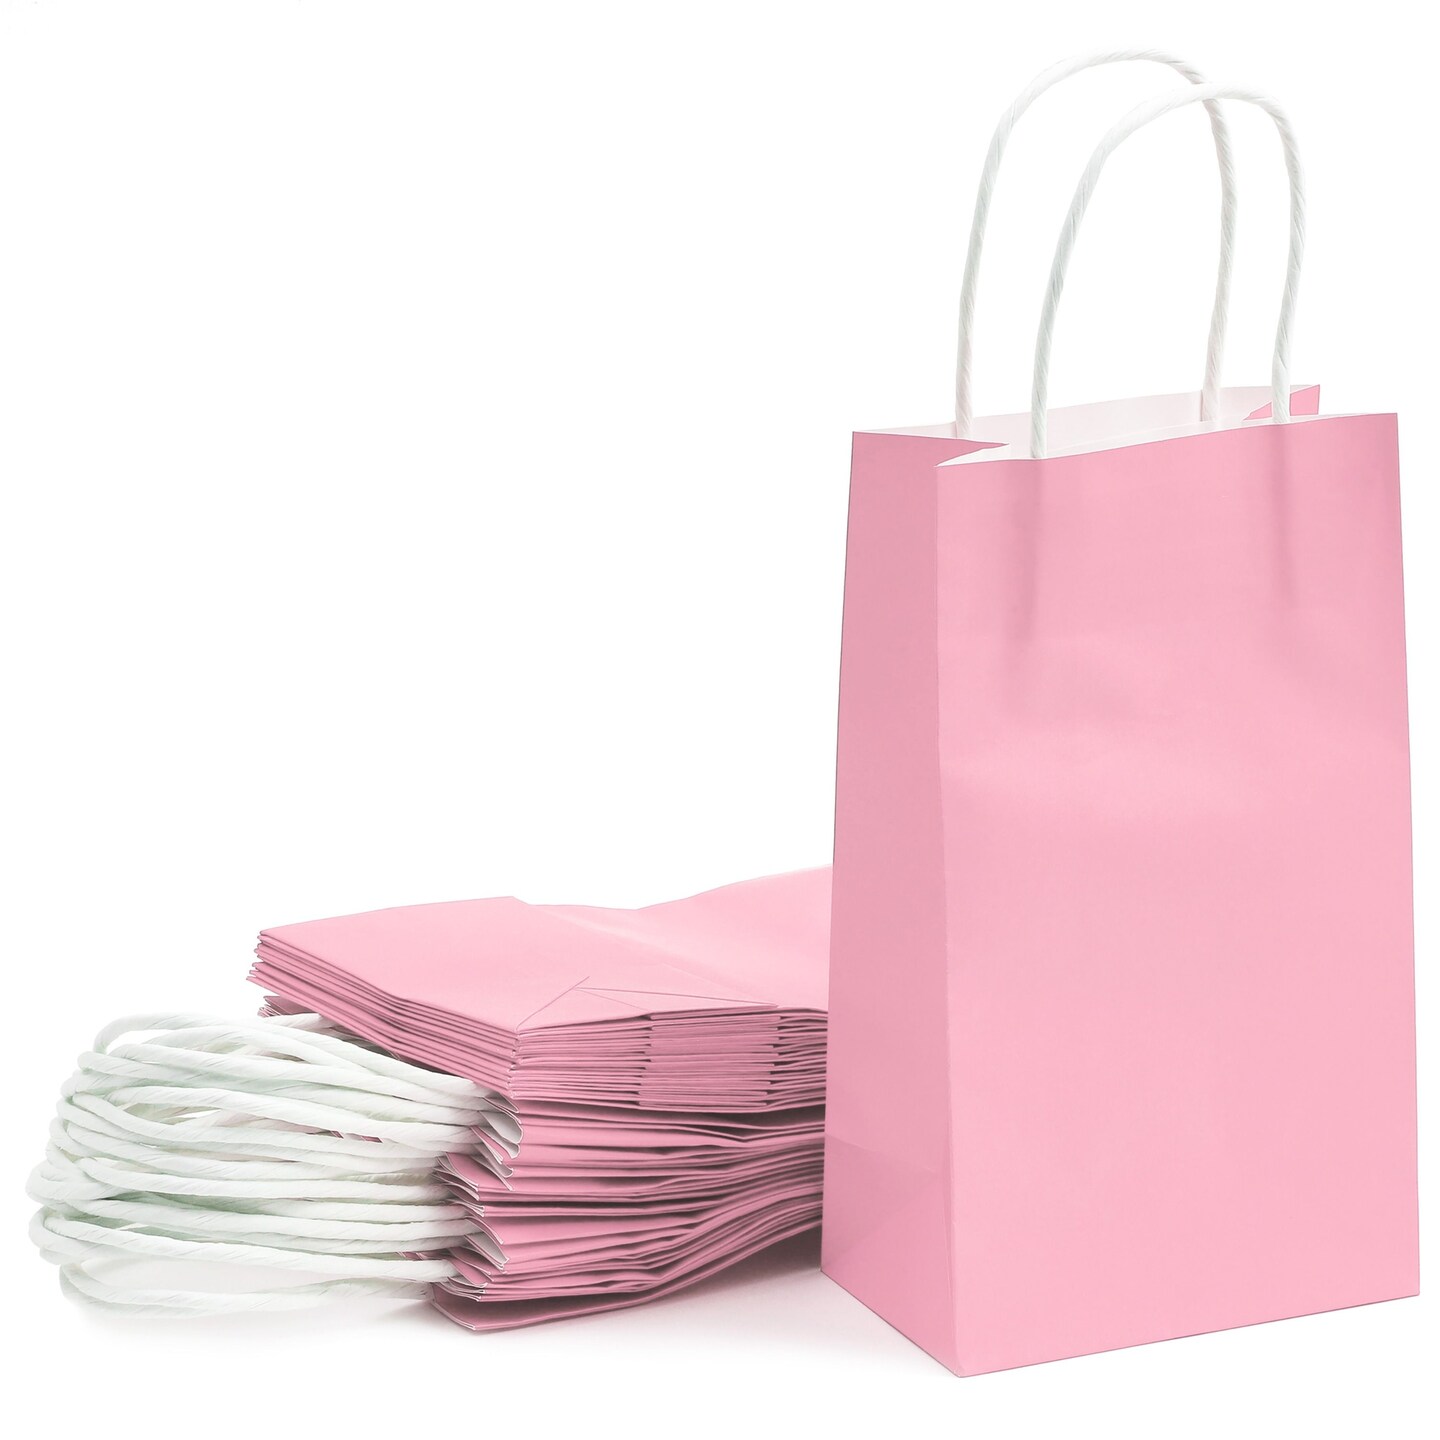 25-Pack Pink Gift Bags with Handles - Small Paper Treat Bags for Birthday, Wedding, Retail (5.3x3.2x9 In)